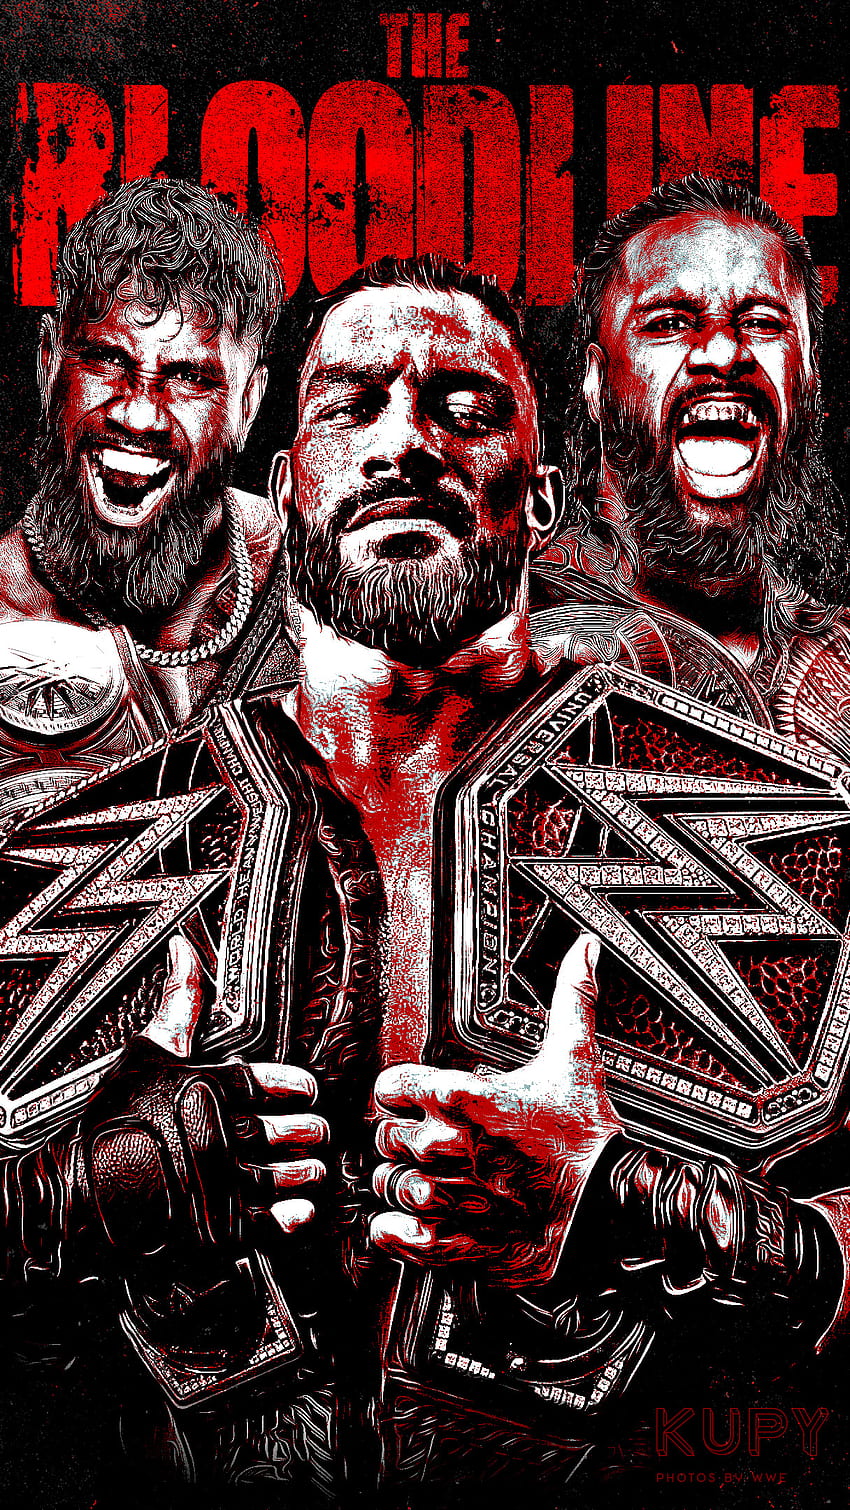 The Bloodline、Kupy、The-Bloodline、WWE、We-The-Ones-Uce、Usos、Roman-Reigns HD電話の壁紙